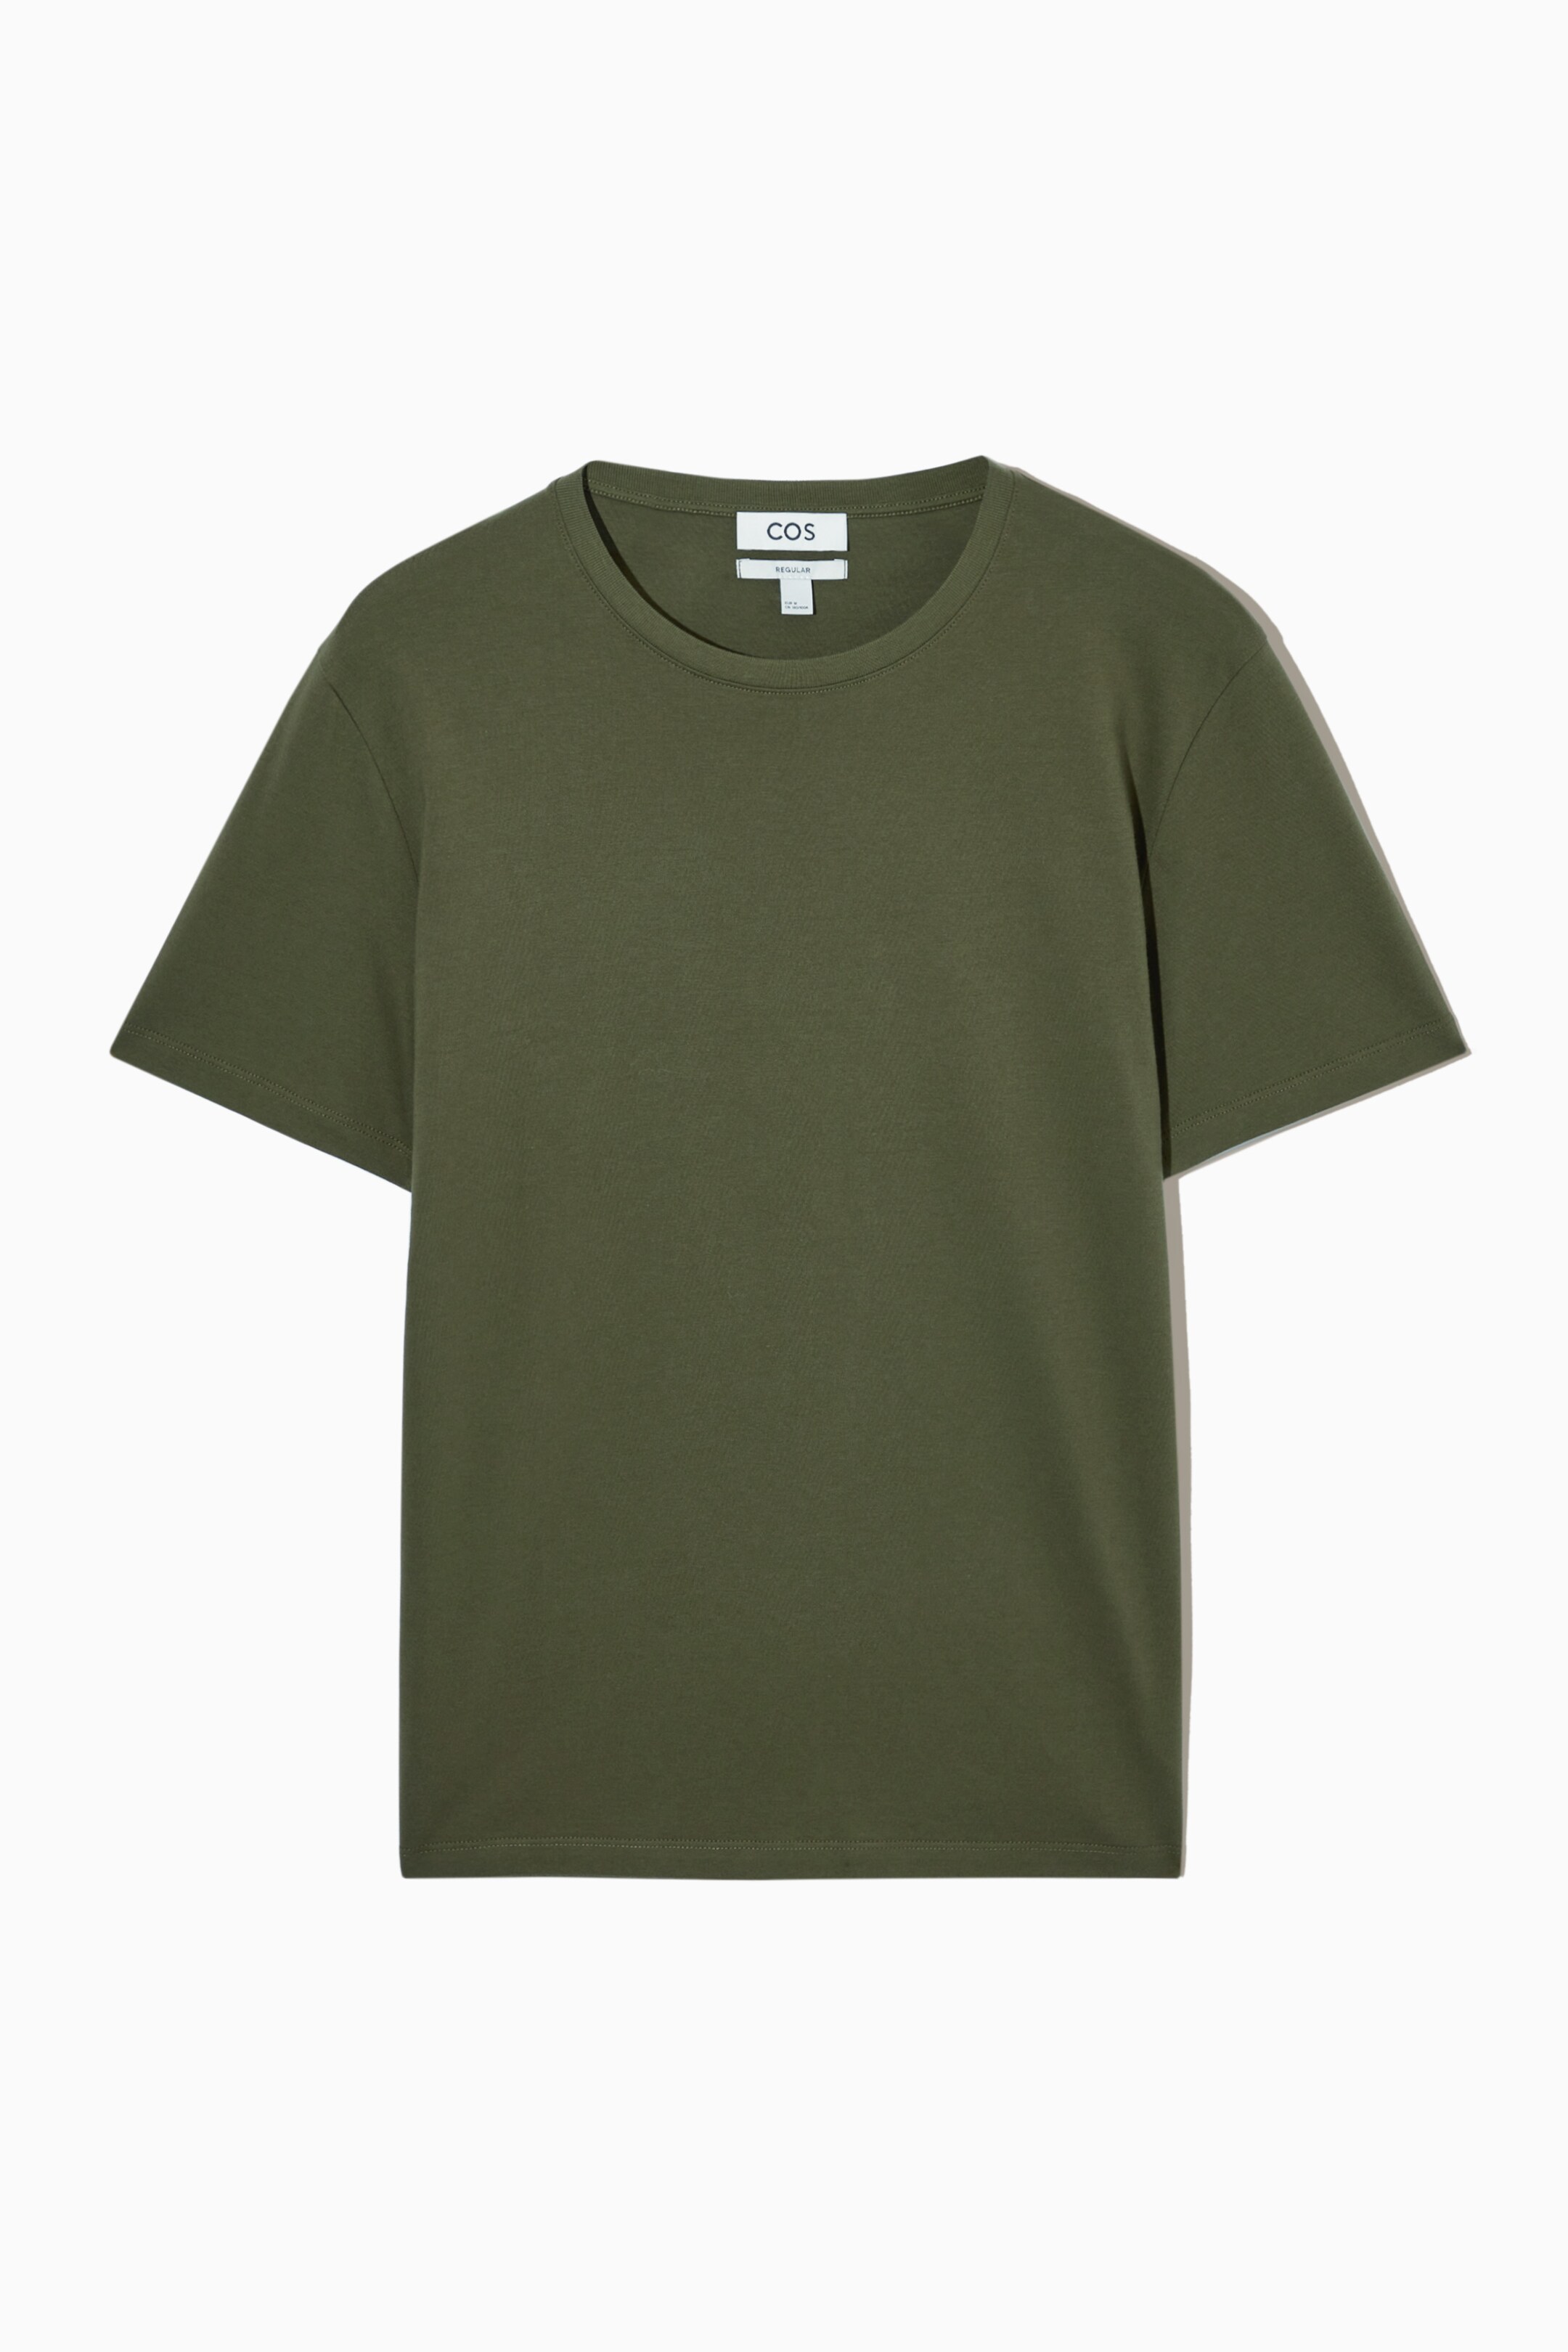 Front image of cos THE EXTRA FINE T-SHIRT in KHAKI